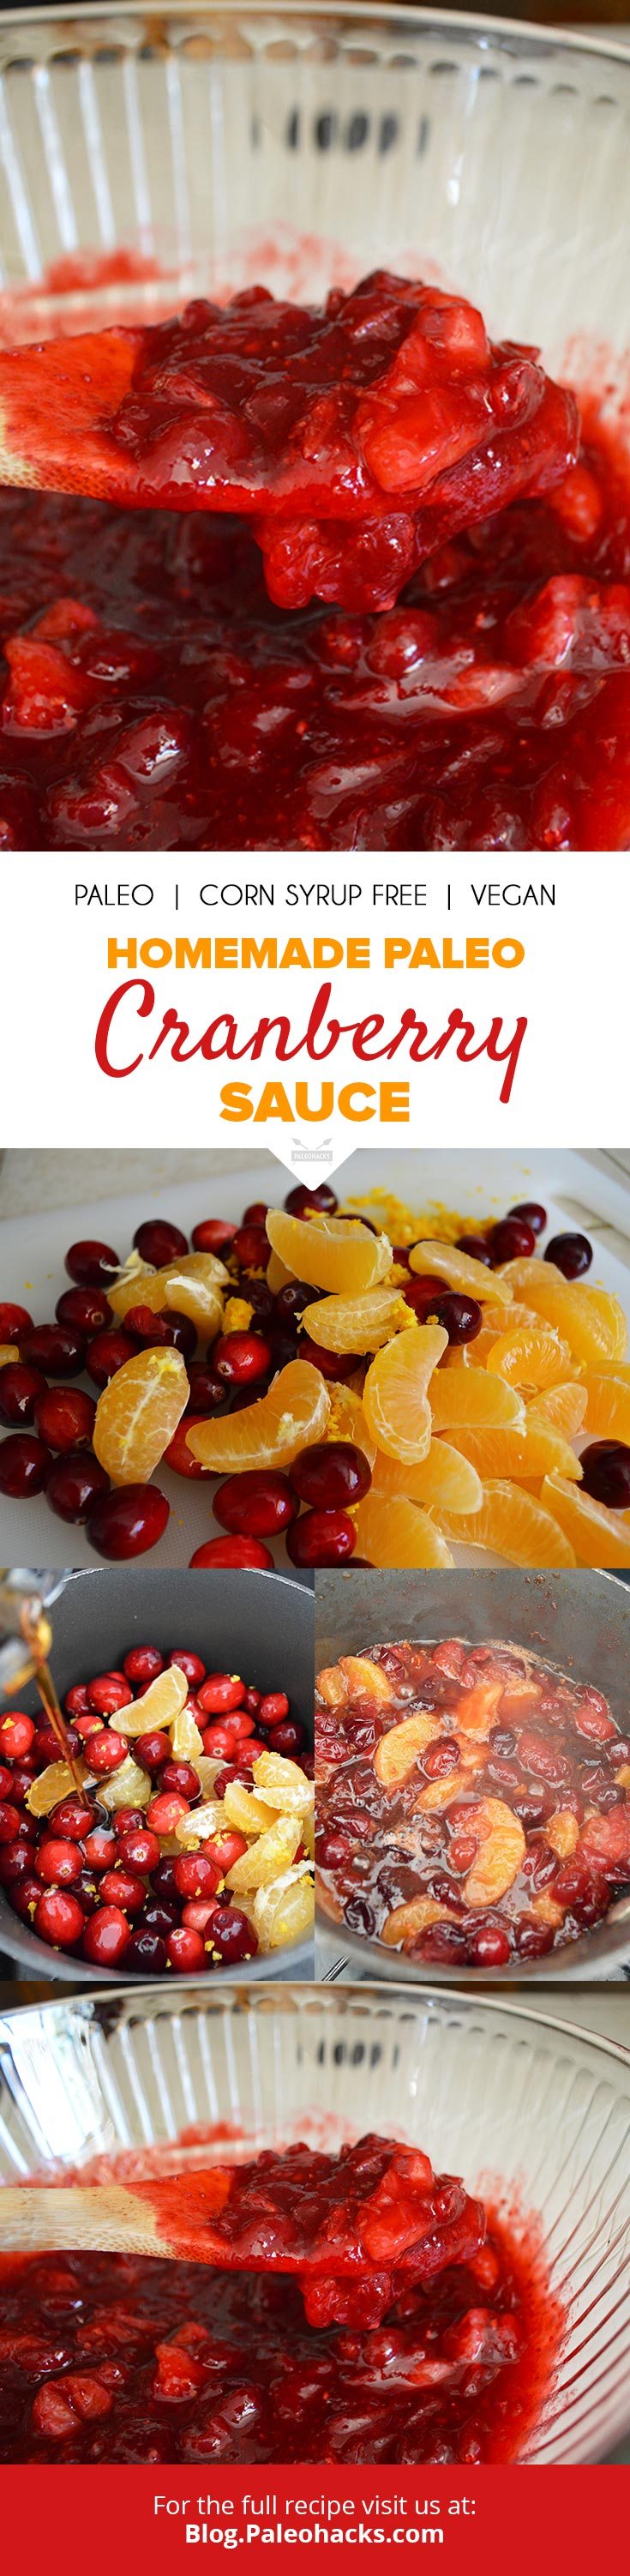 This homemade cranberry sauce tastes like autumn incarnate, with notes of tart cranberries, maple, orange zest and spice.